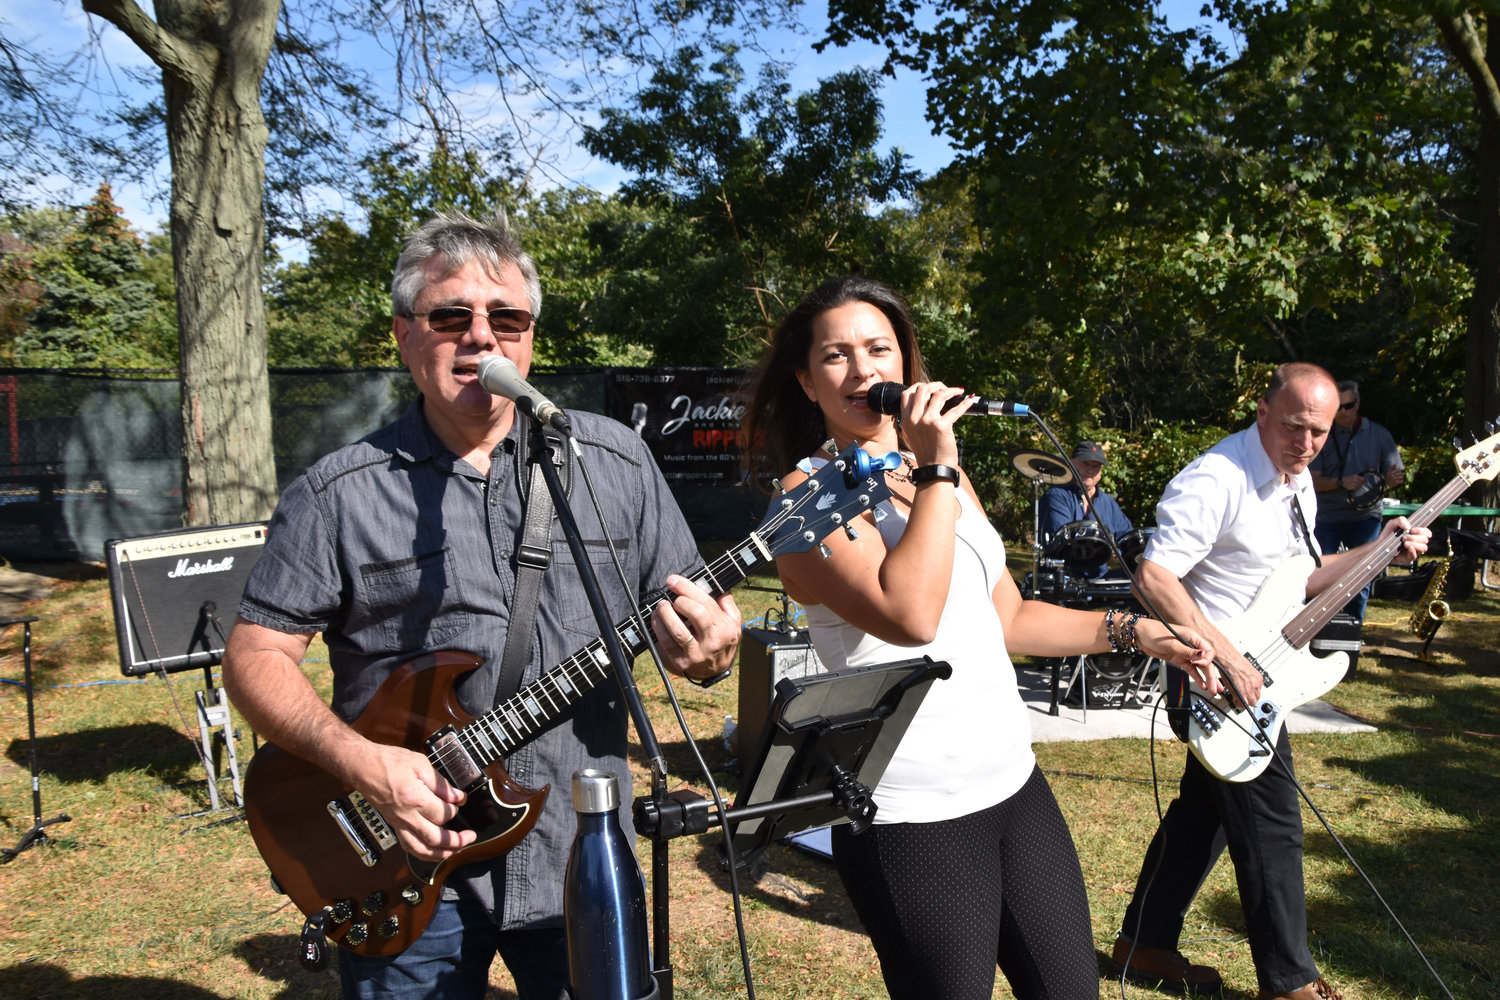 Lead guitarist Donald Melchione, of Stewart Manor, vocalist Jackie Vadala, of Seaford, and bass guitarist Mark Nygren of the cover band Jackie and the Rippers.